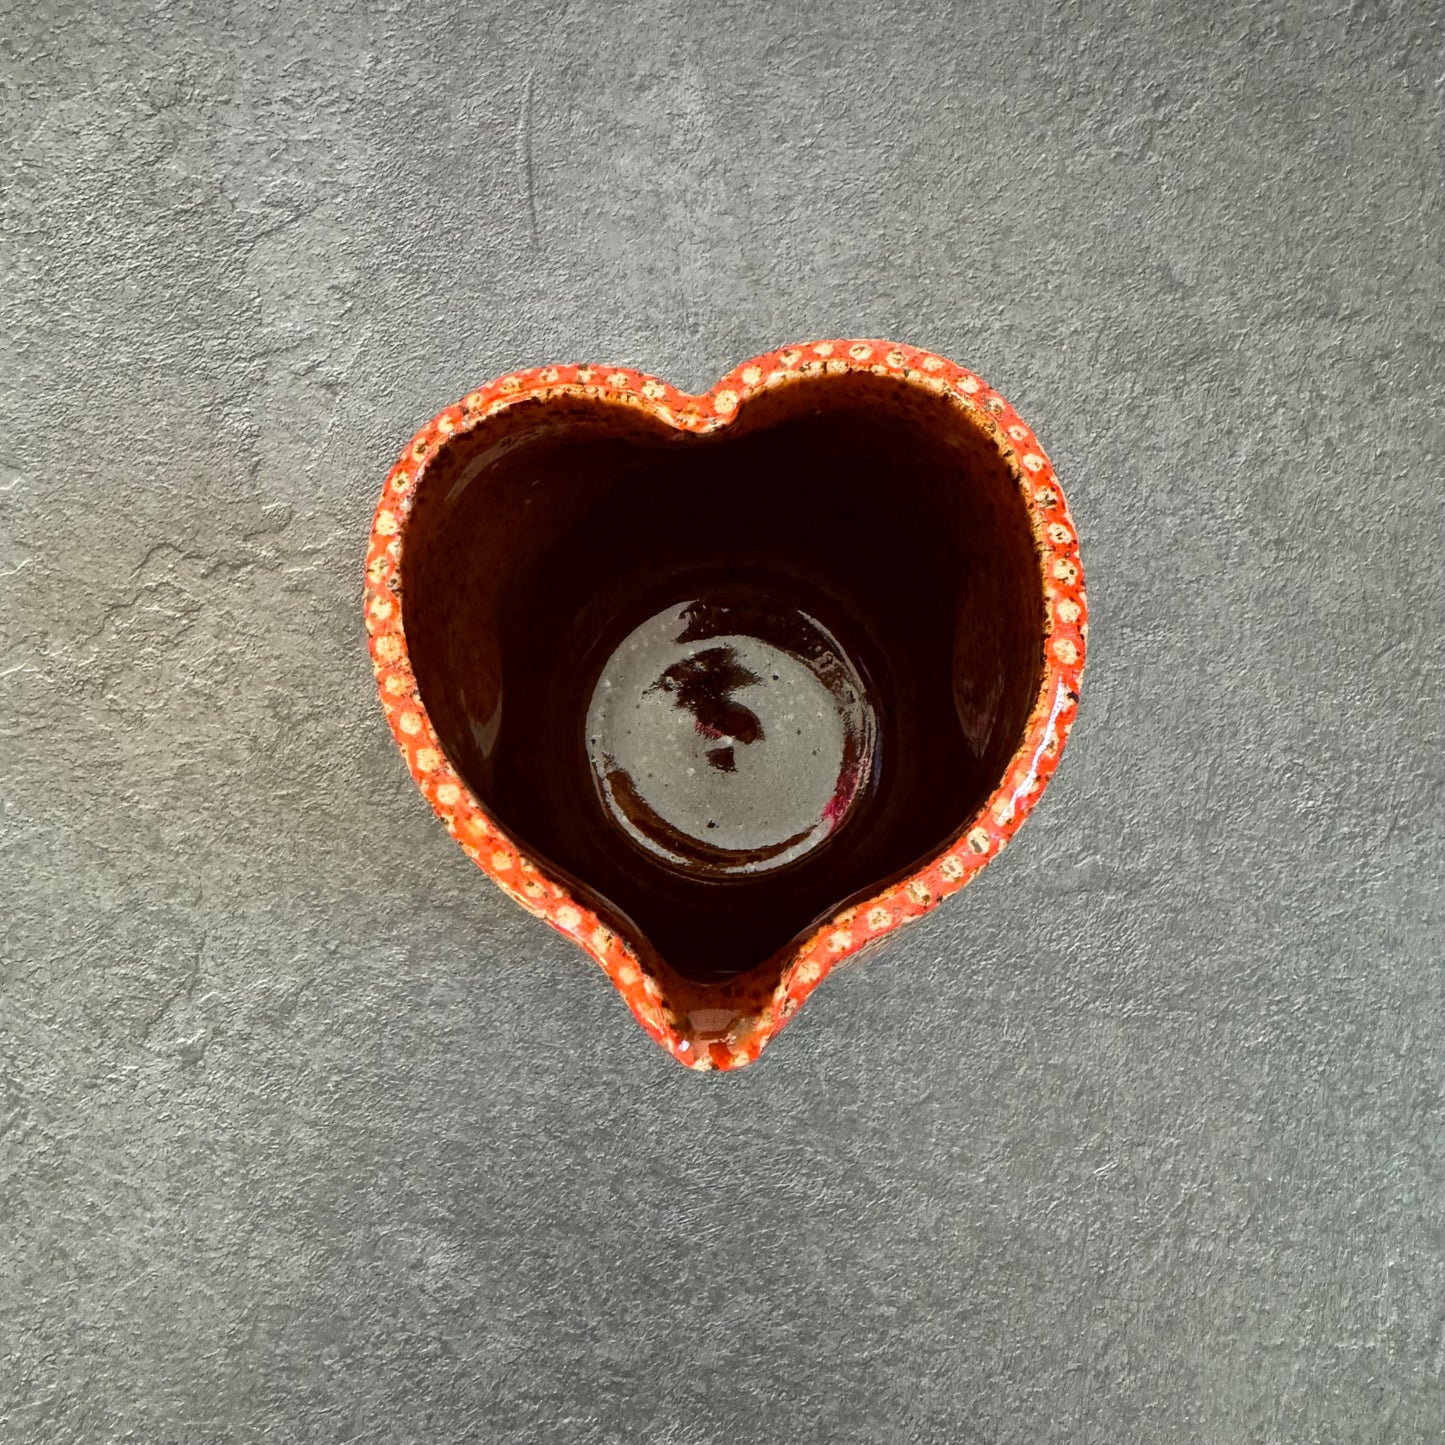 Heart Cup with Orange Triangle Design